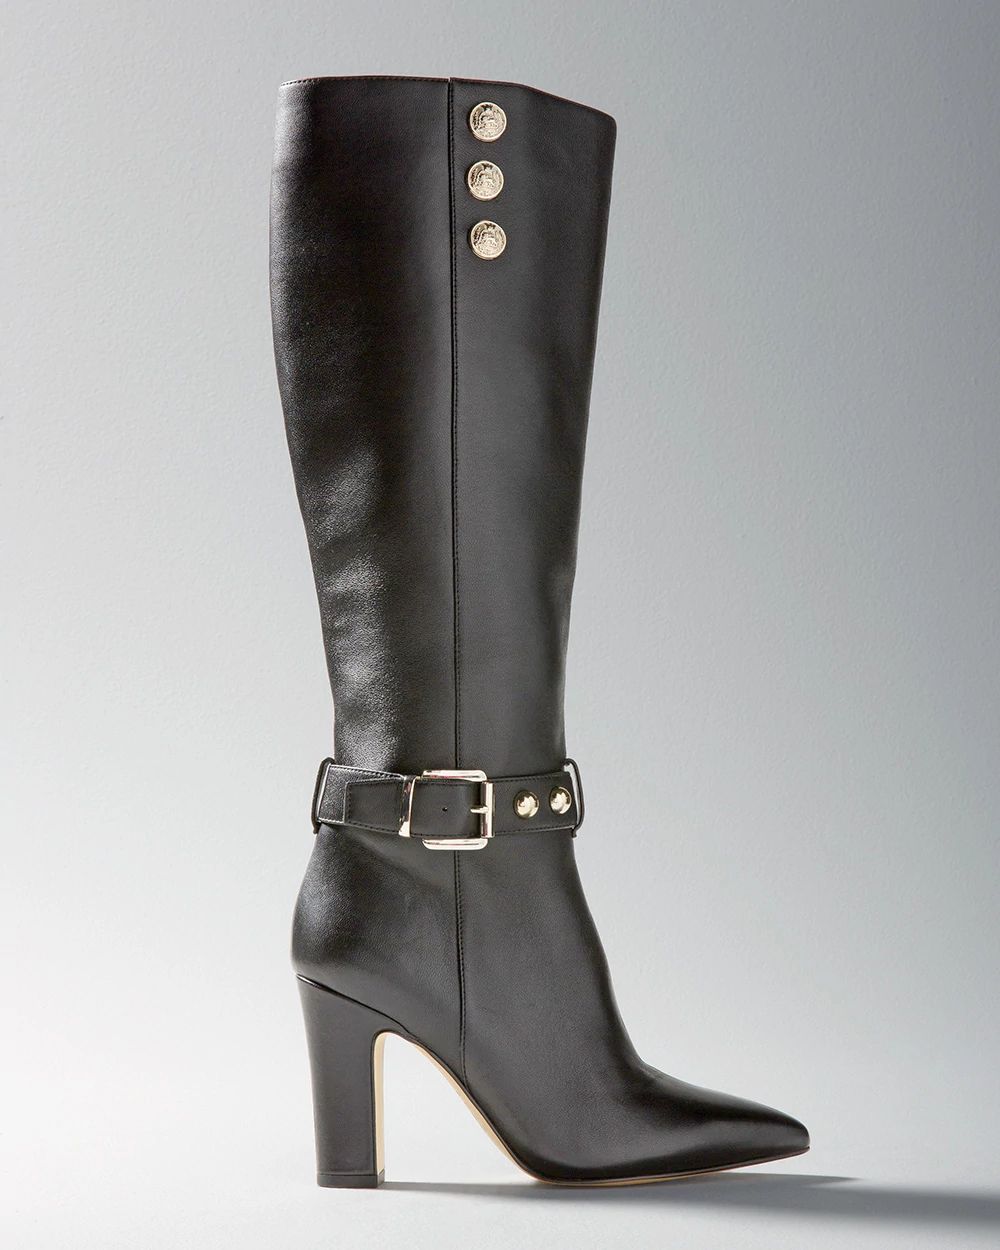 Leather Military High-Heel Boot click to view larger image.